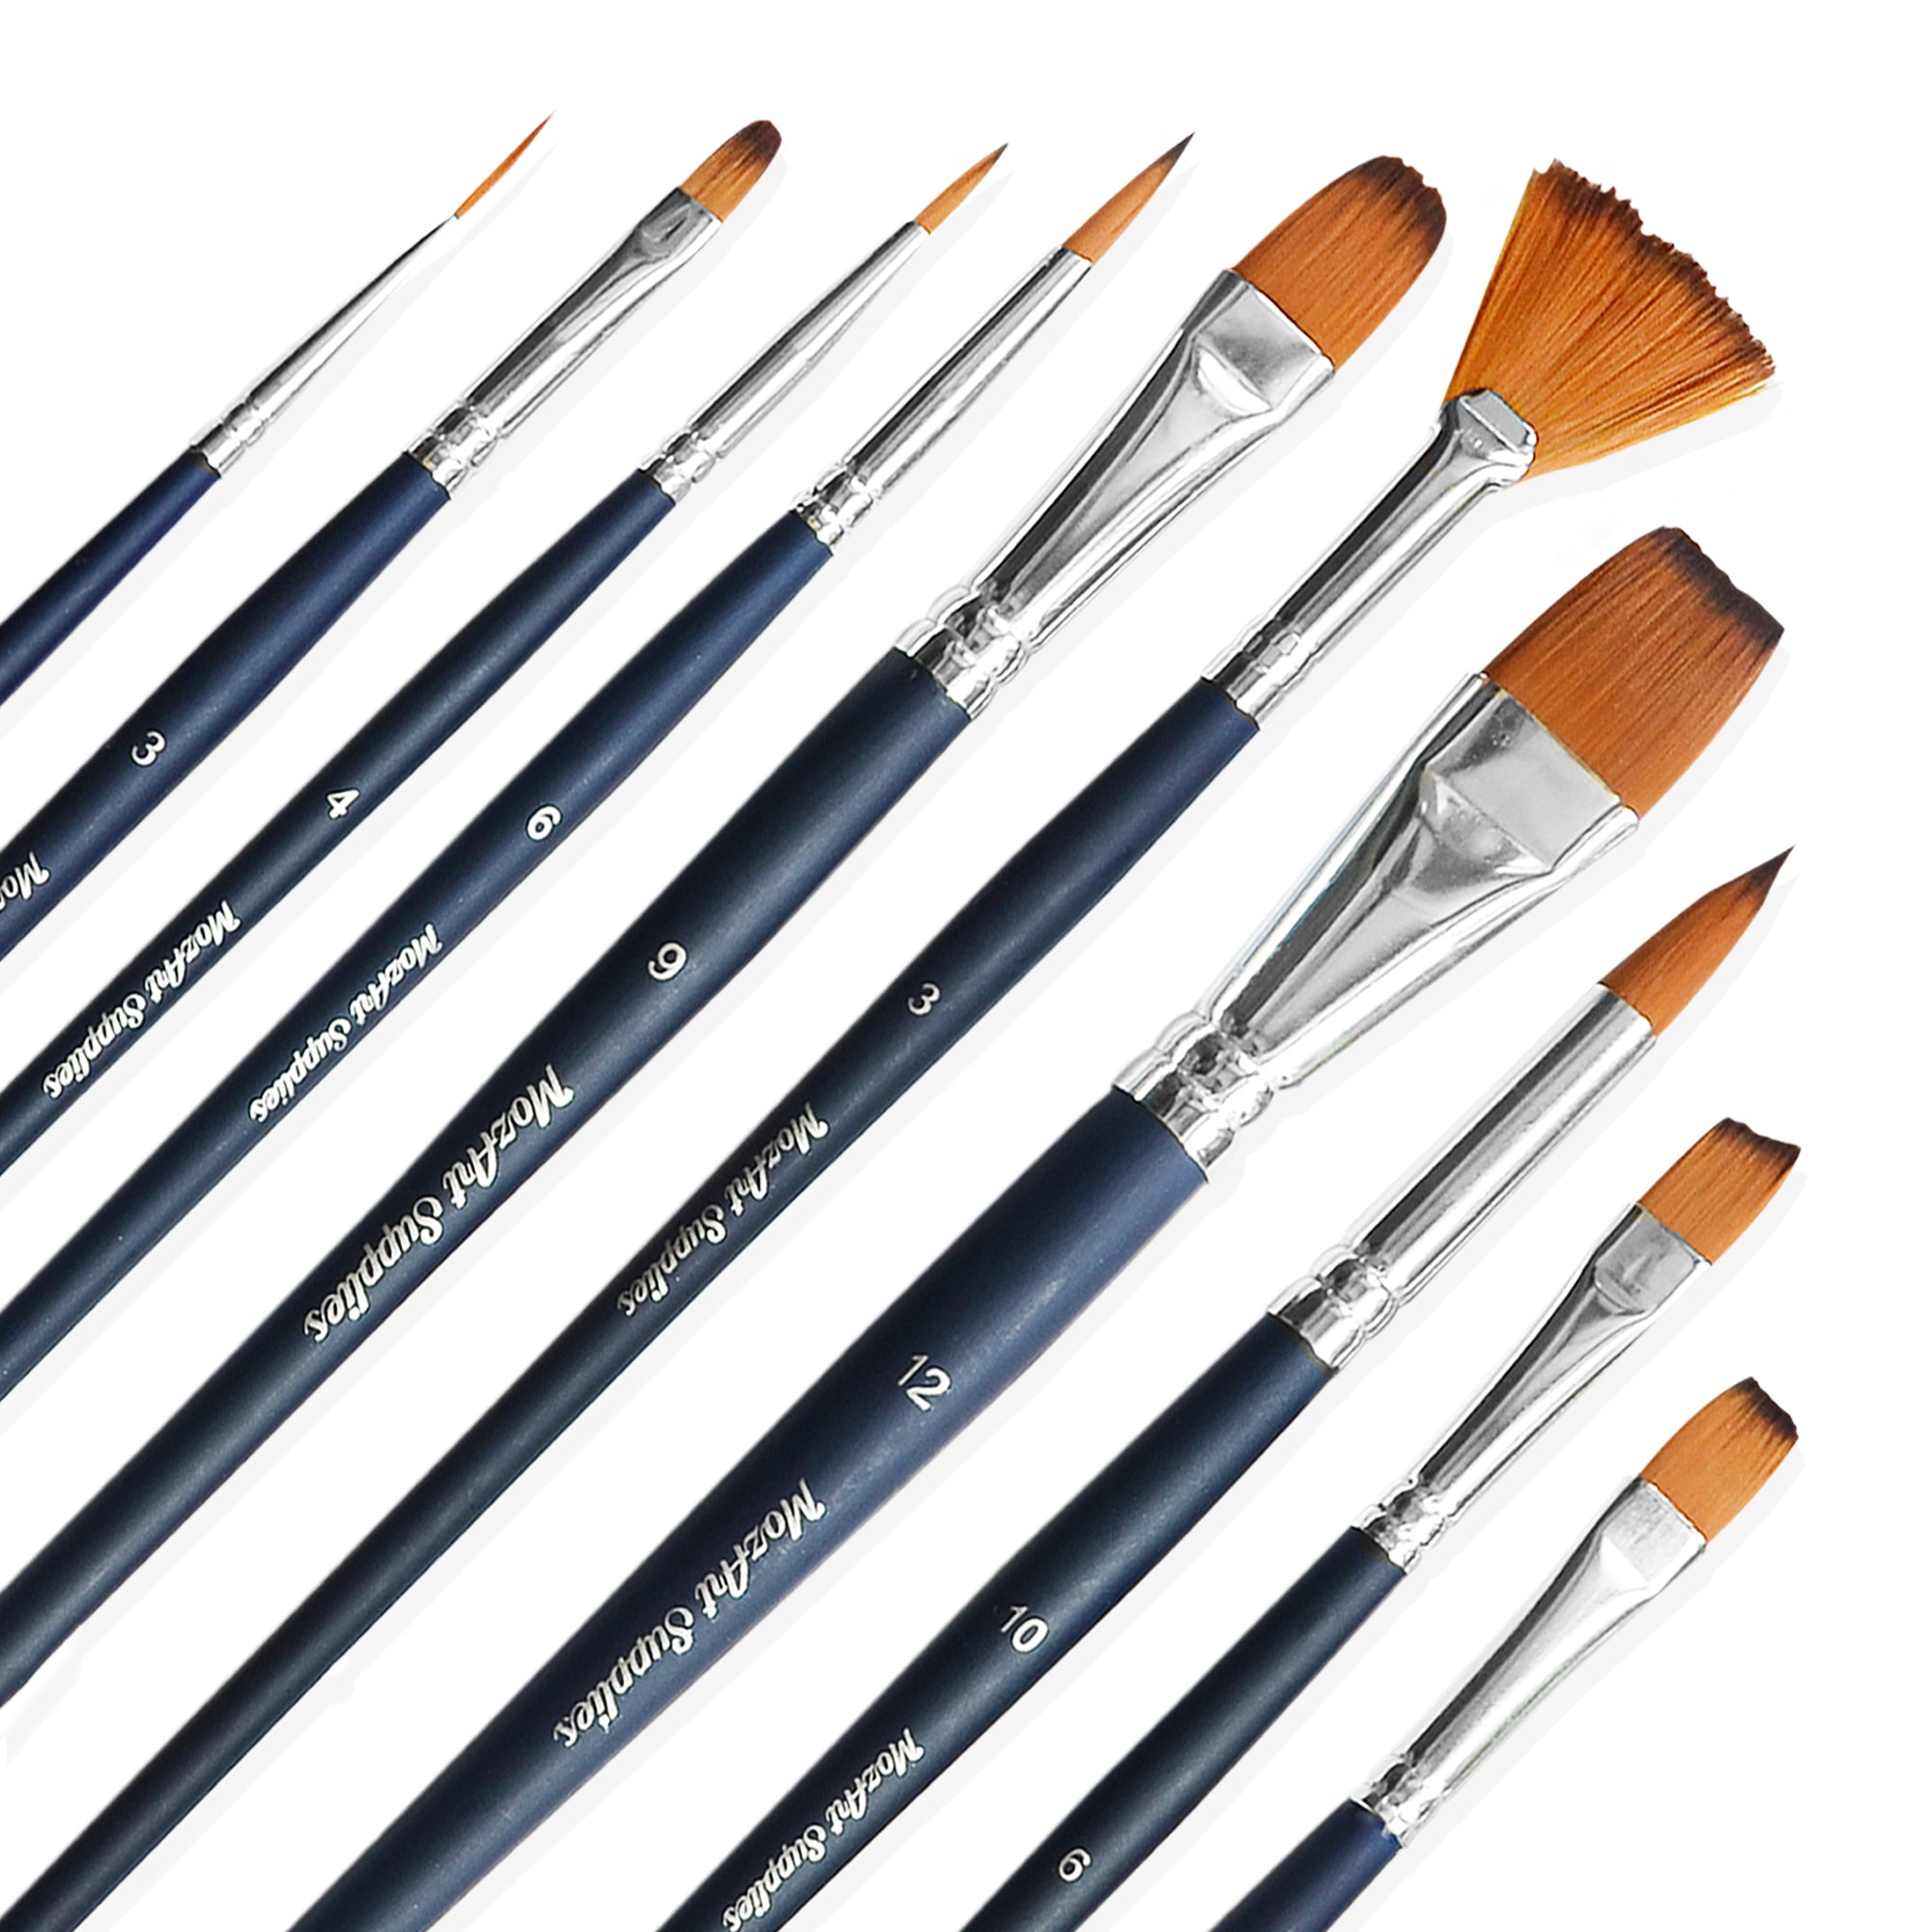 Watercolour Brushes, Paint Brushes